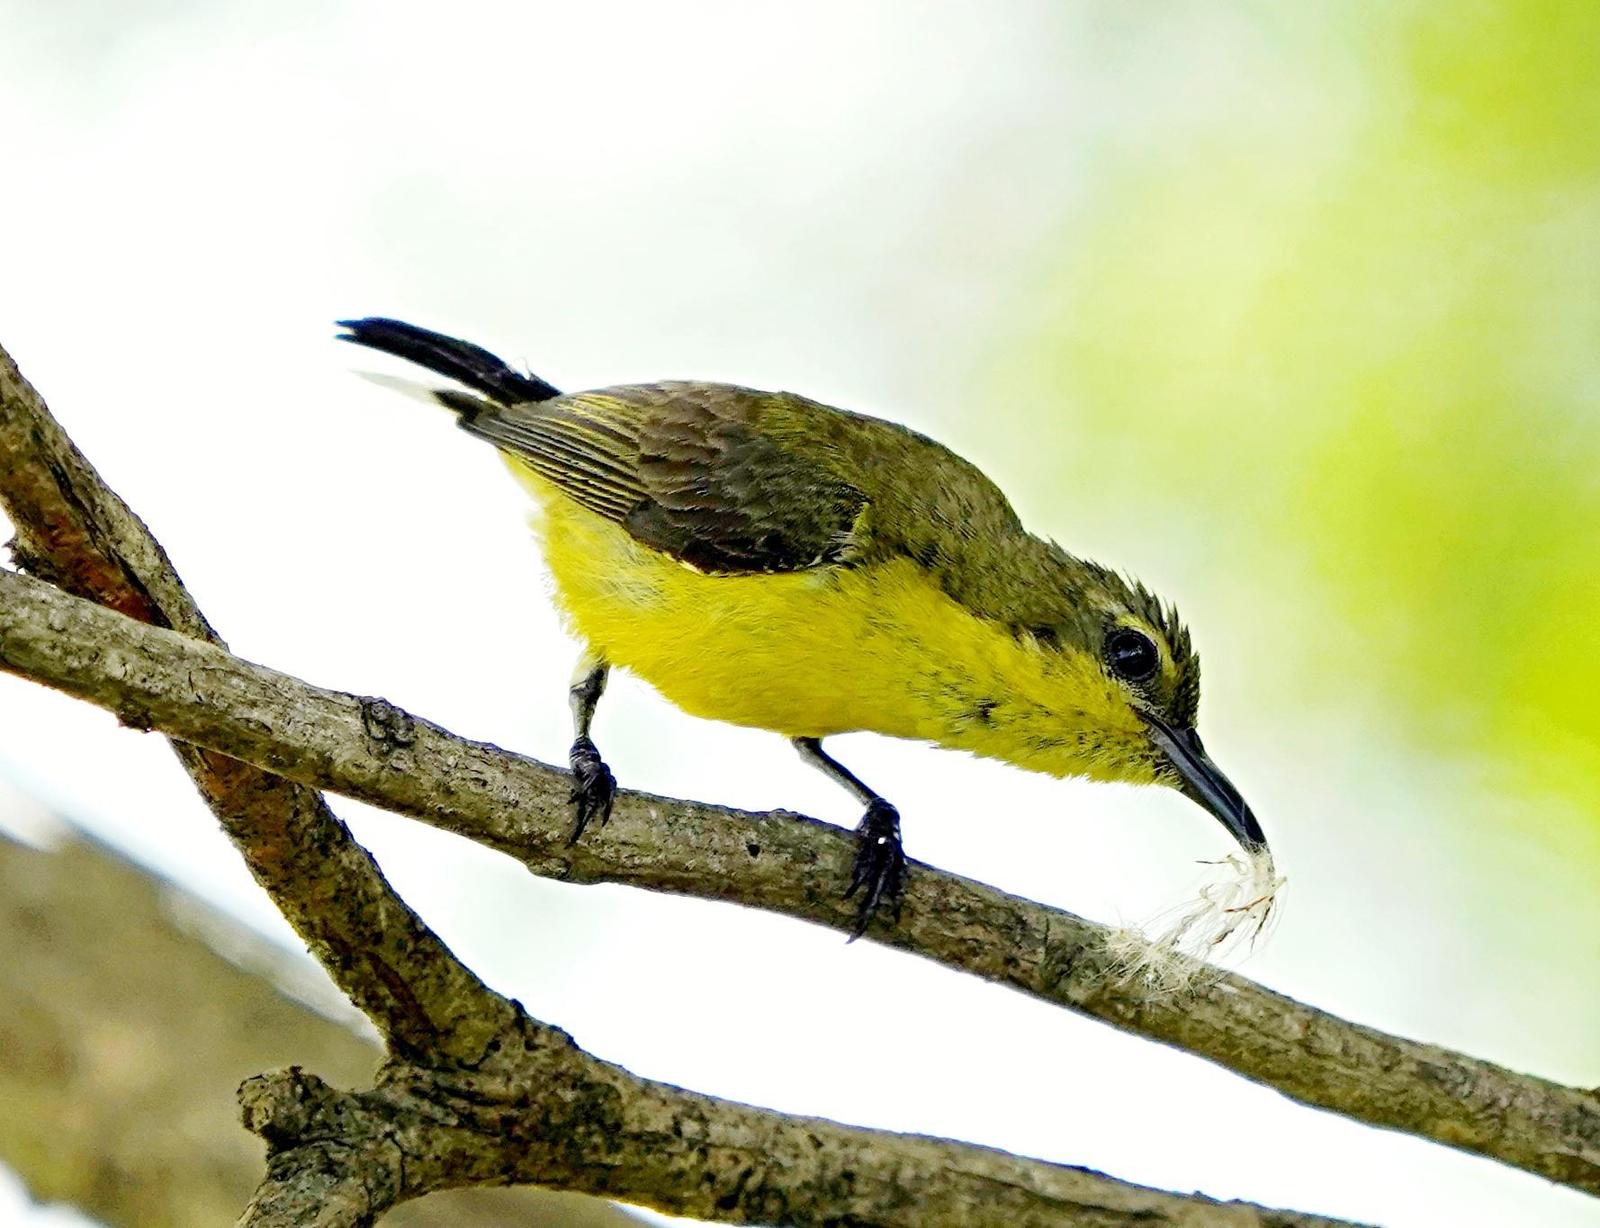 Golden-bellied Gerygone Photo by Steven Cheong